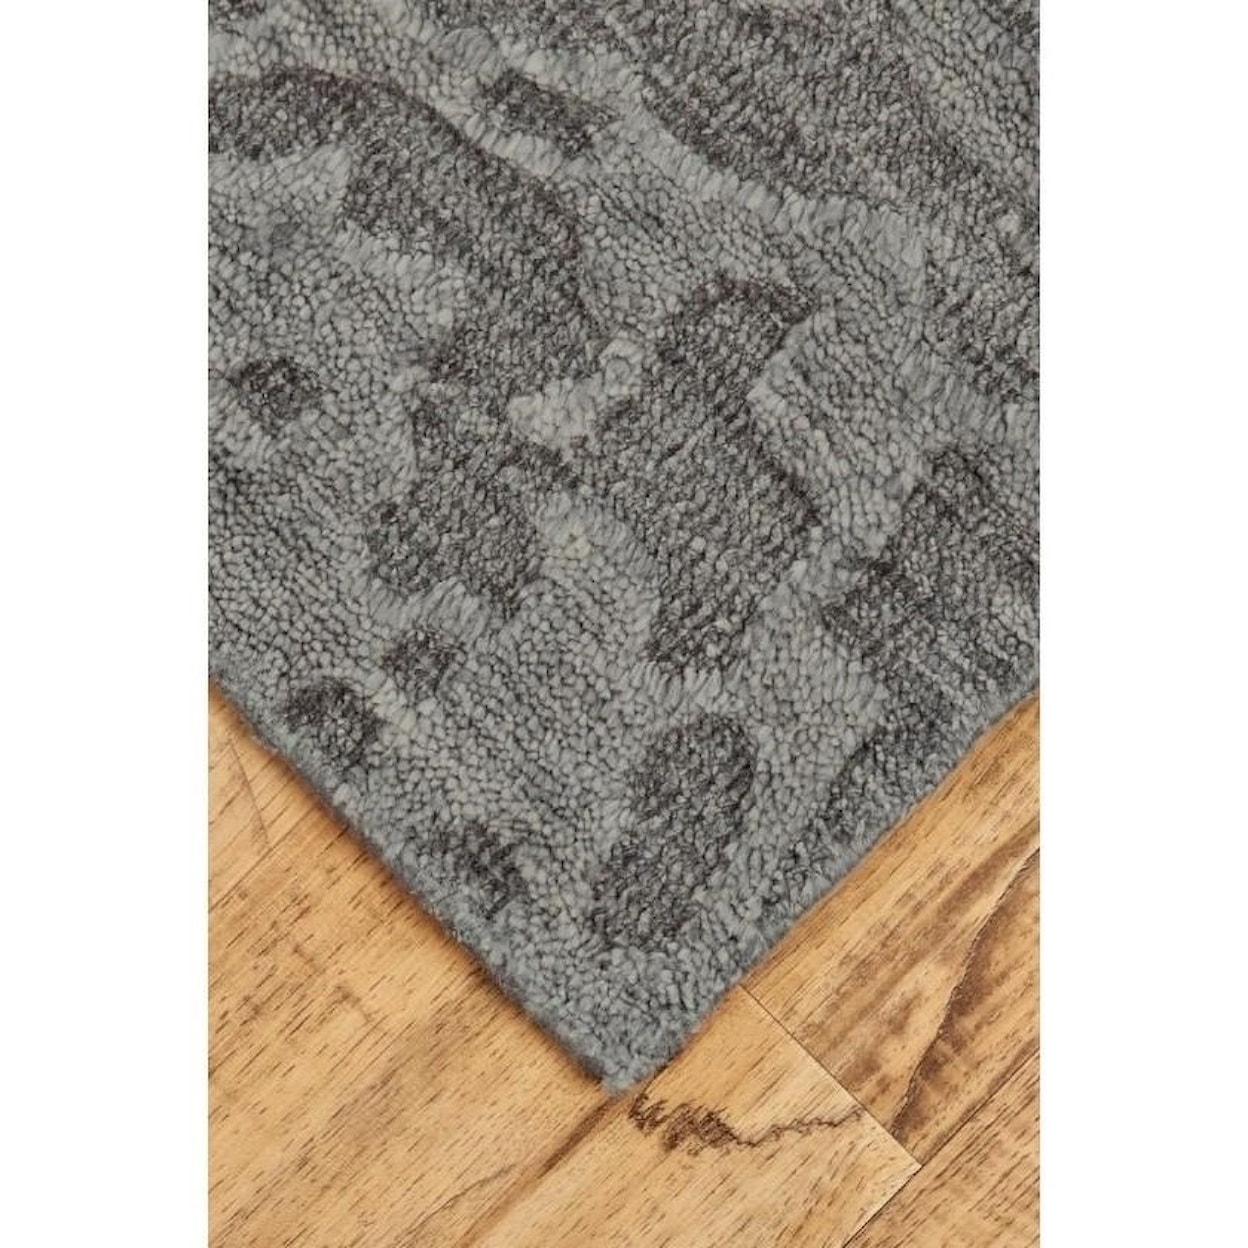 Feizy Rugs Leilani Storm 2' x 3' Area Rug